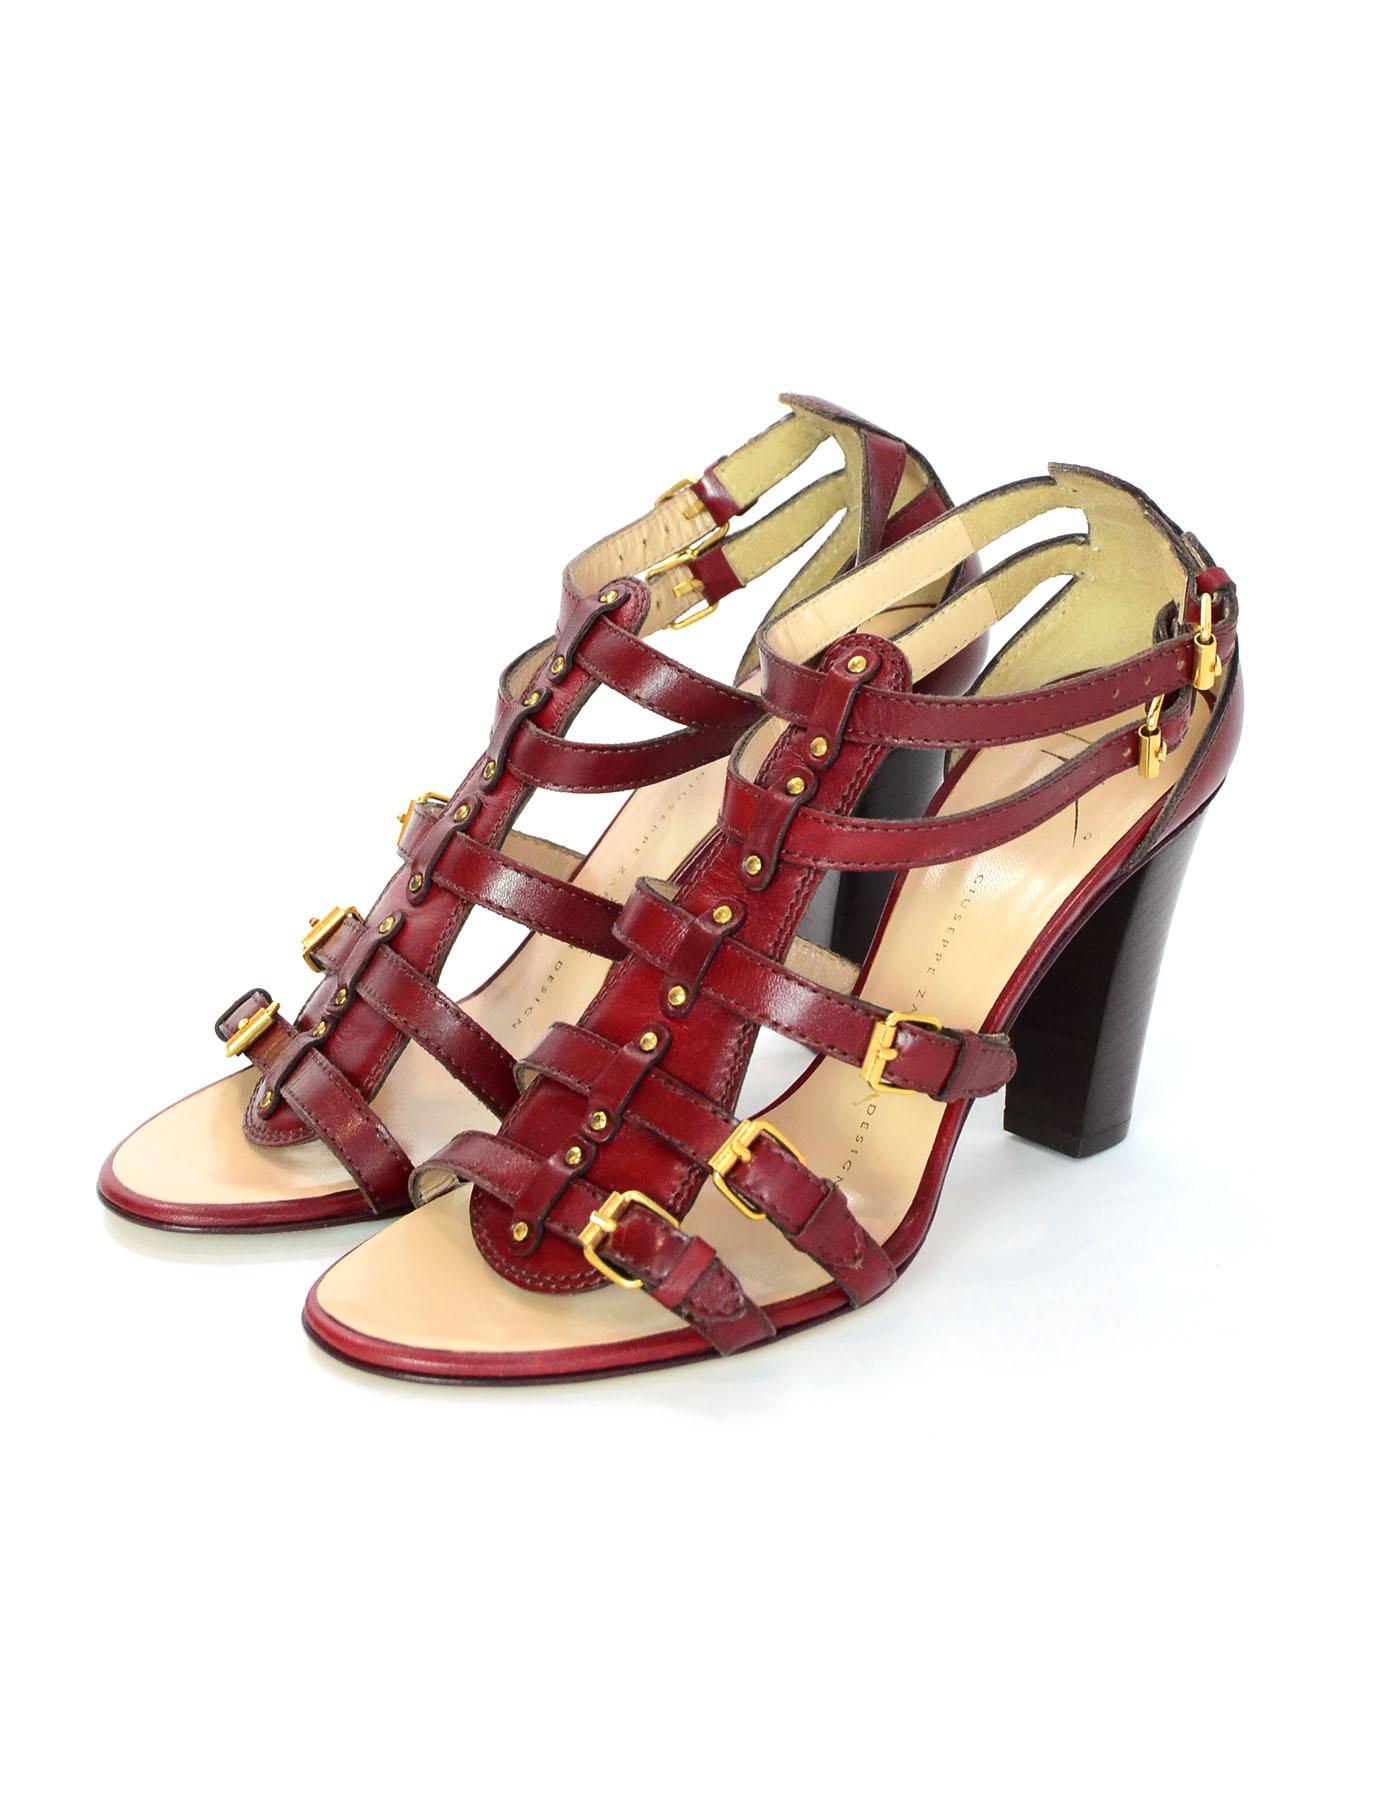 Giuseppe Zanotti Brick Red Leather Caged Sandals Sz 37.5 NEW

Made In: Italy
Color: Brick red
Materials: Leather, metal
Closure/Opening: Buckle closure at ankle
Sole Stamp: vero cuoio made in italy 37.5
Overall Condition: Excellent pre- owned